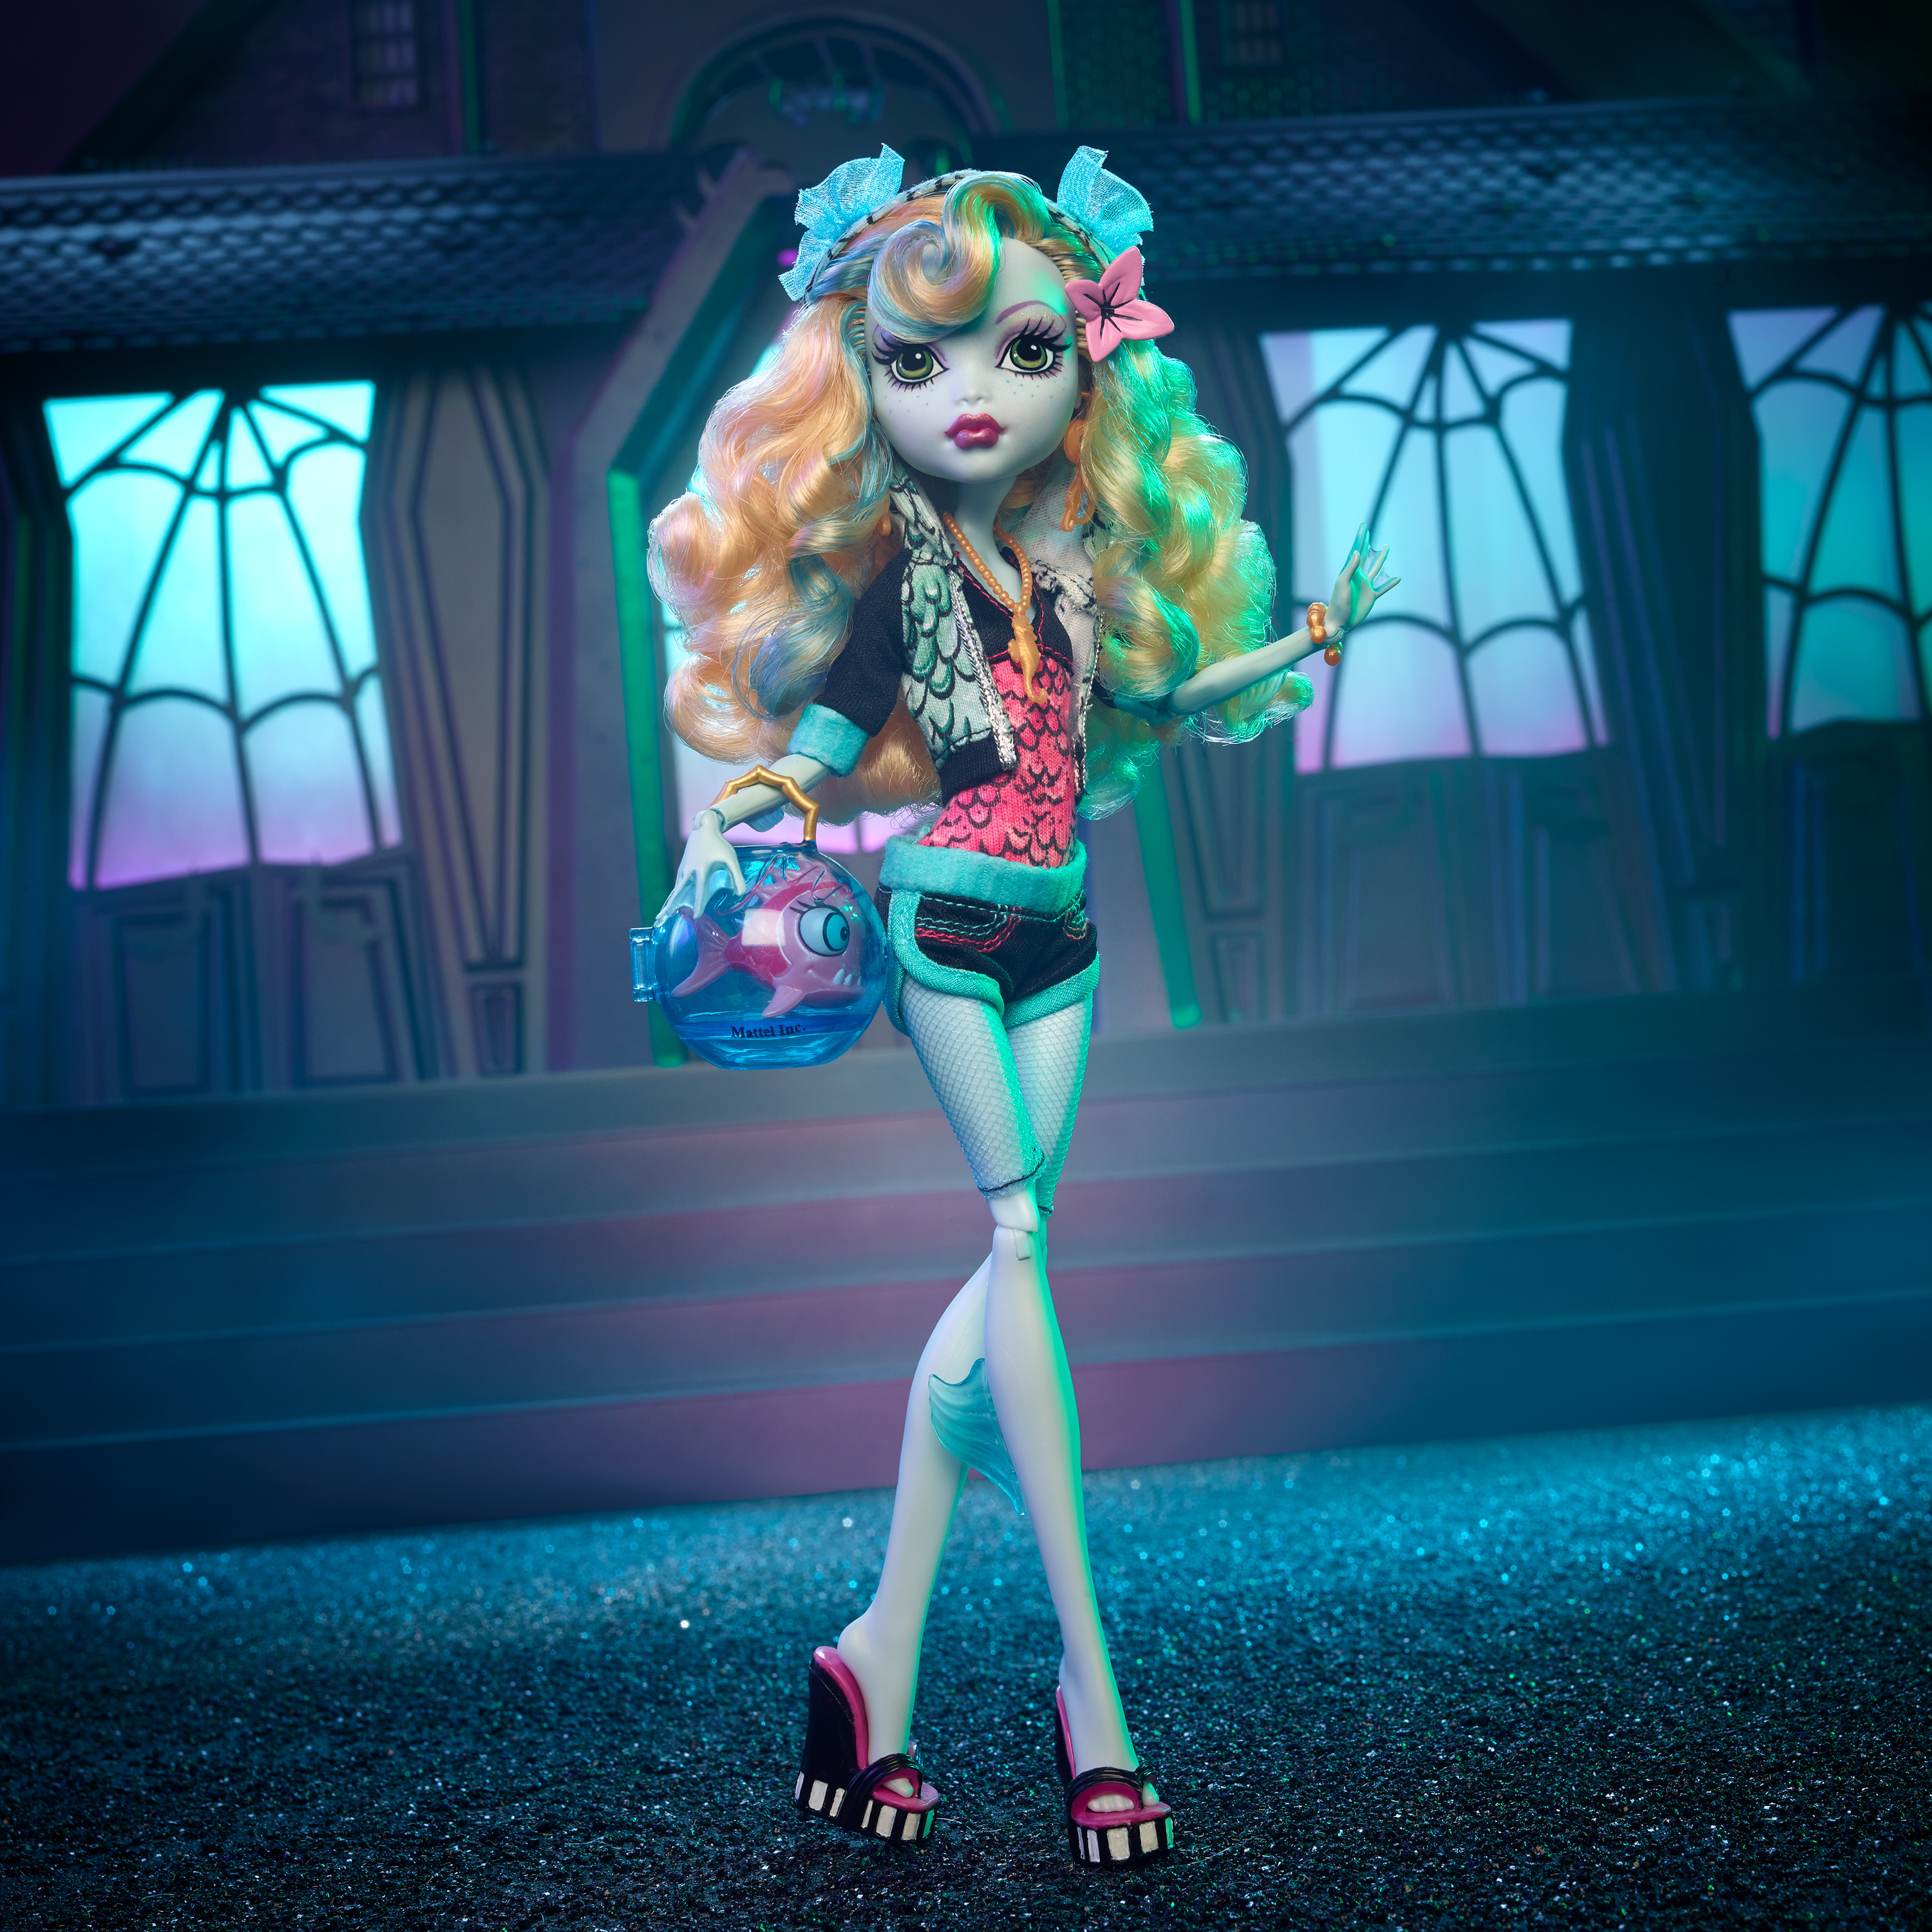 Monster High Lagoona Blue Doll, Collectible Reproduction in Original Look with Diary & Doll Stand - image 2 of 6